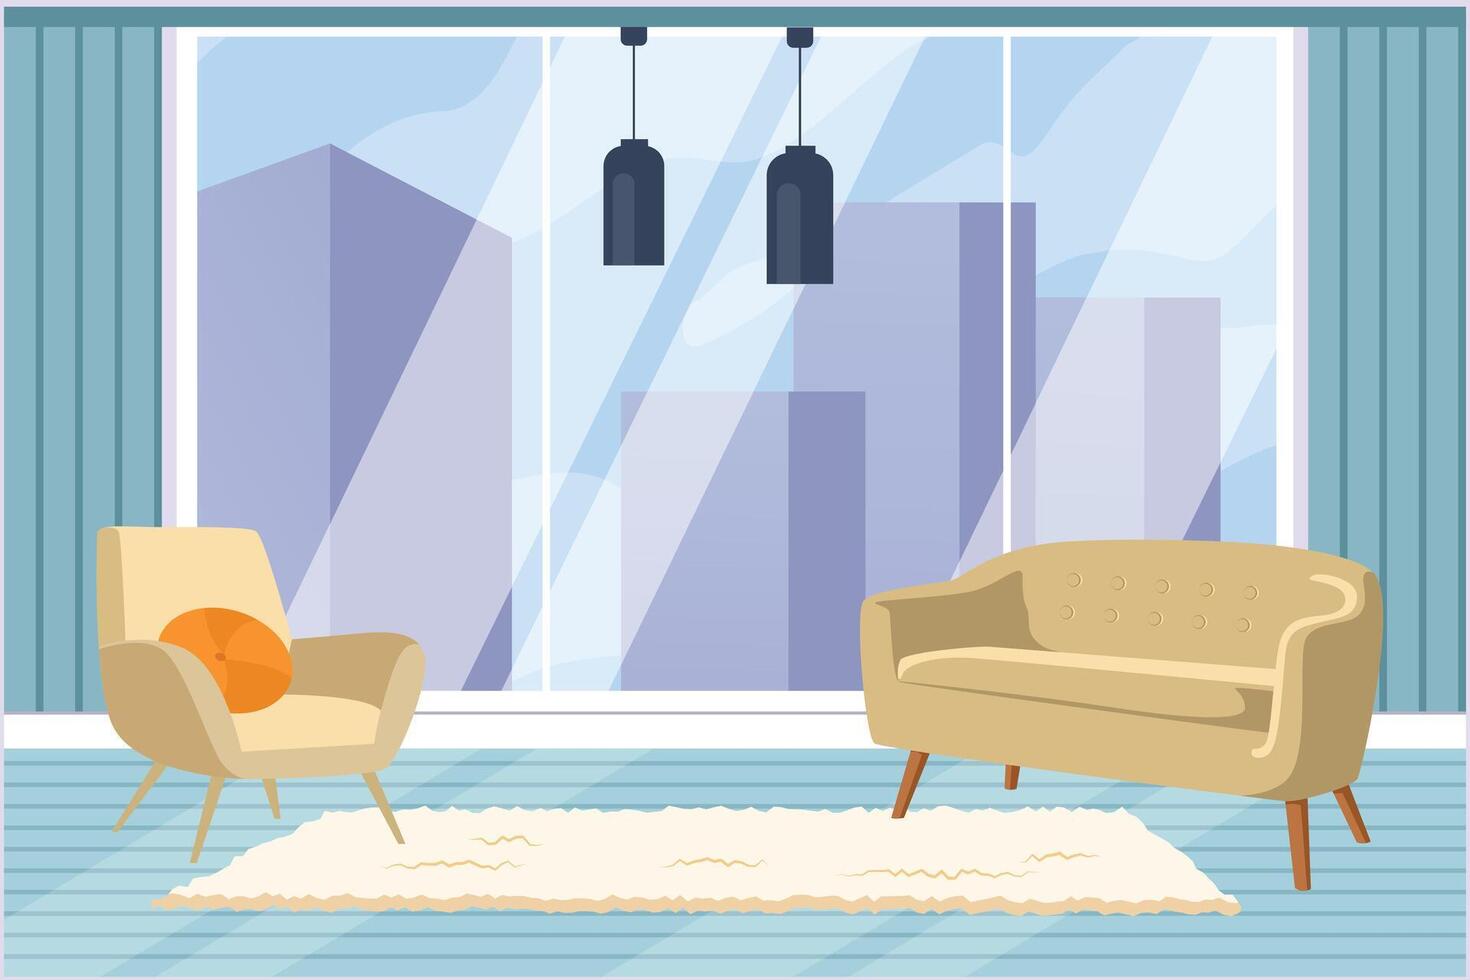 Living room with furniture. Home interior design concept. Colored flat vector illustration isolated.